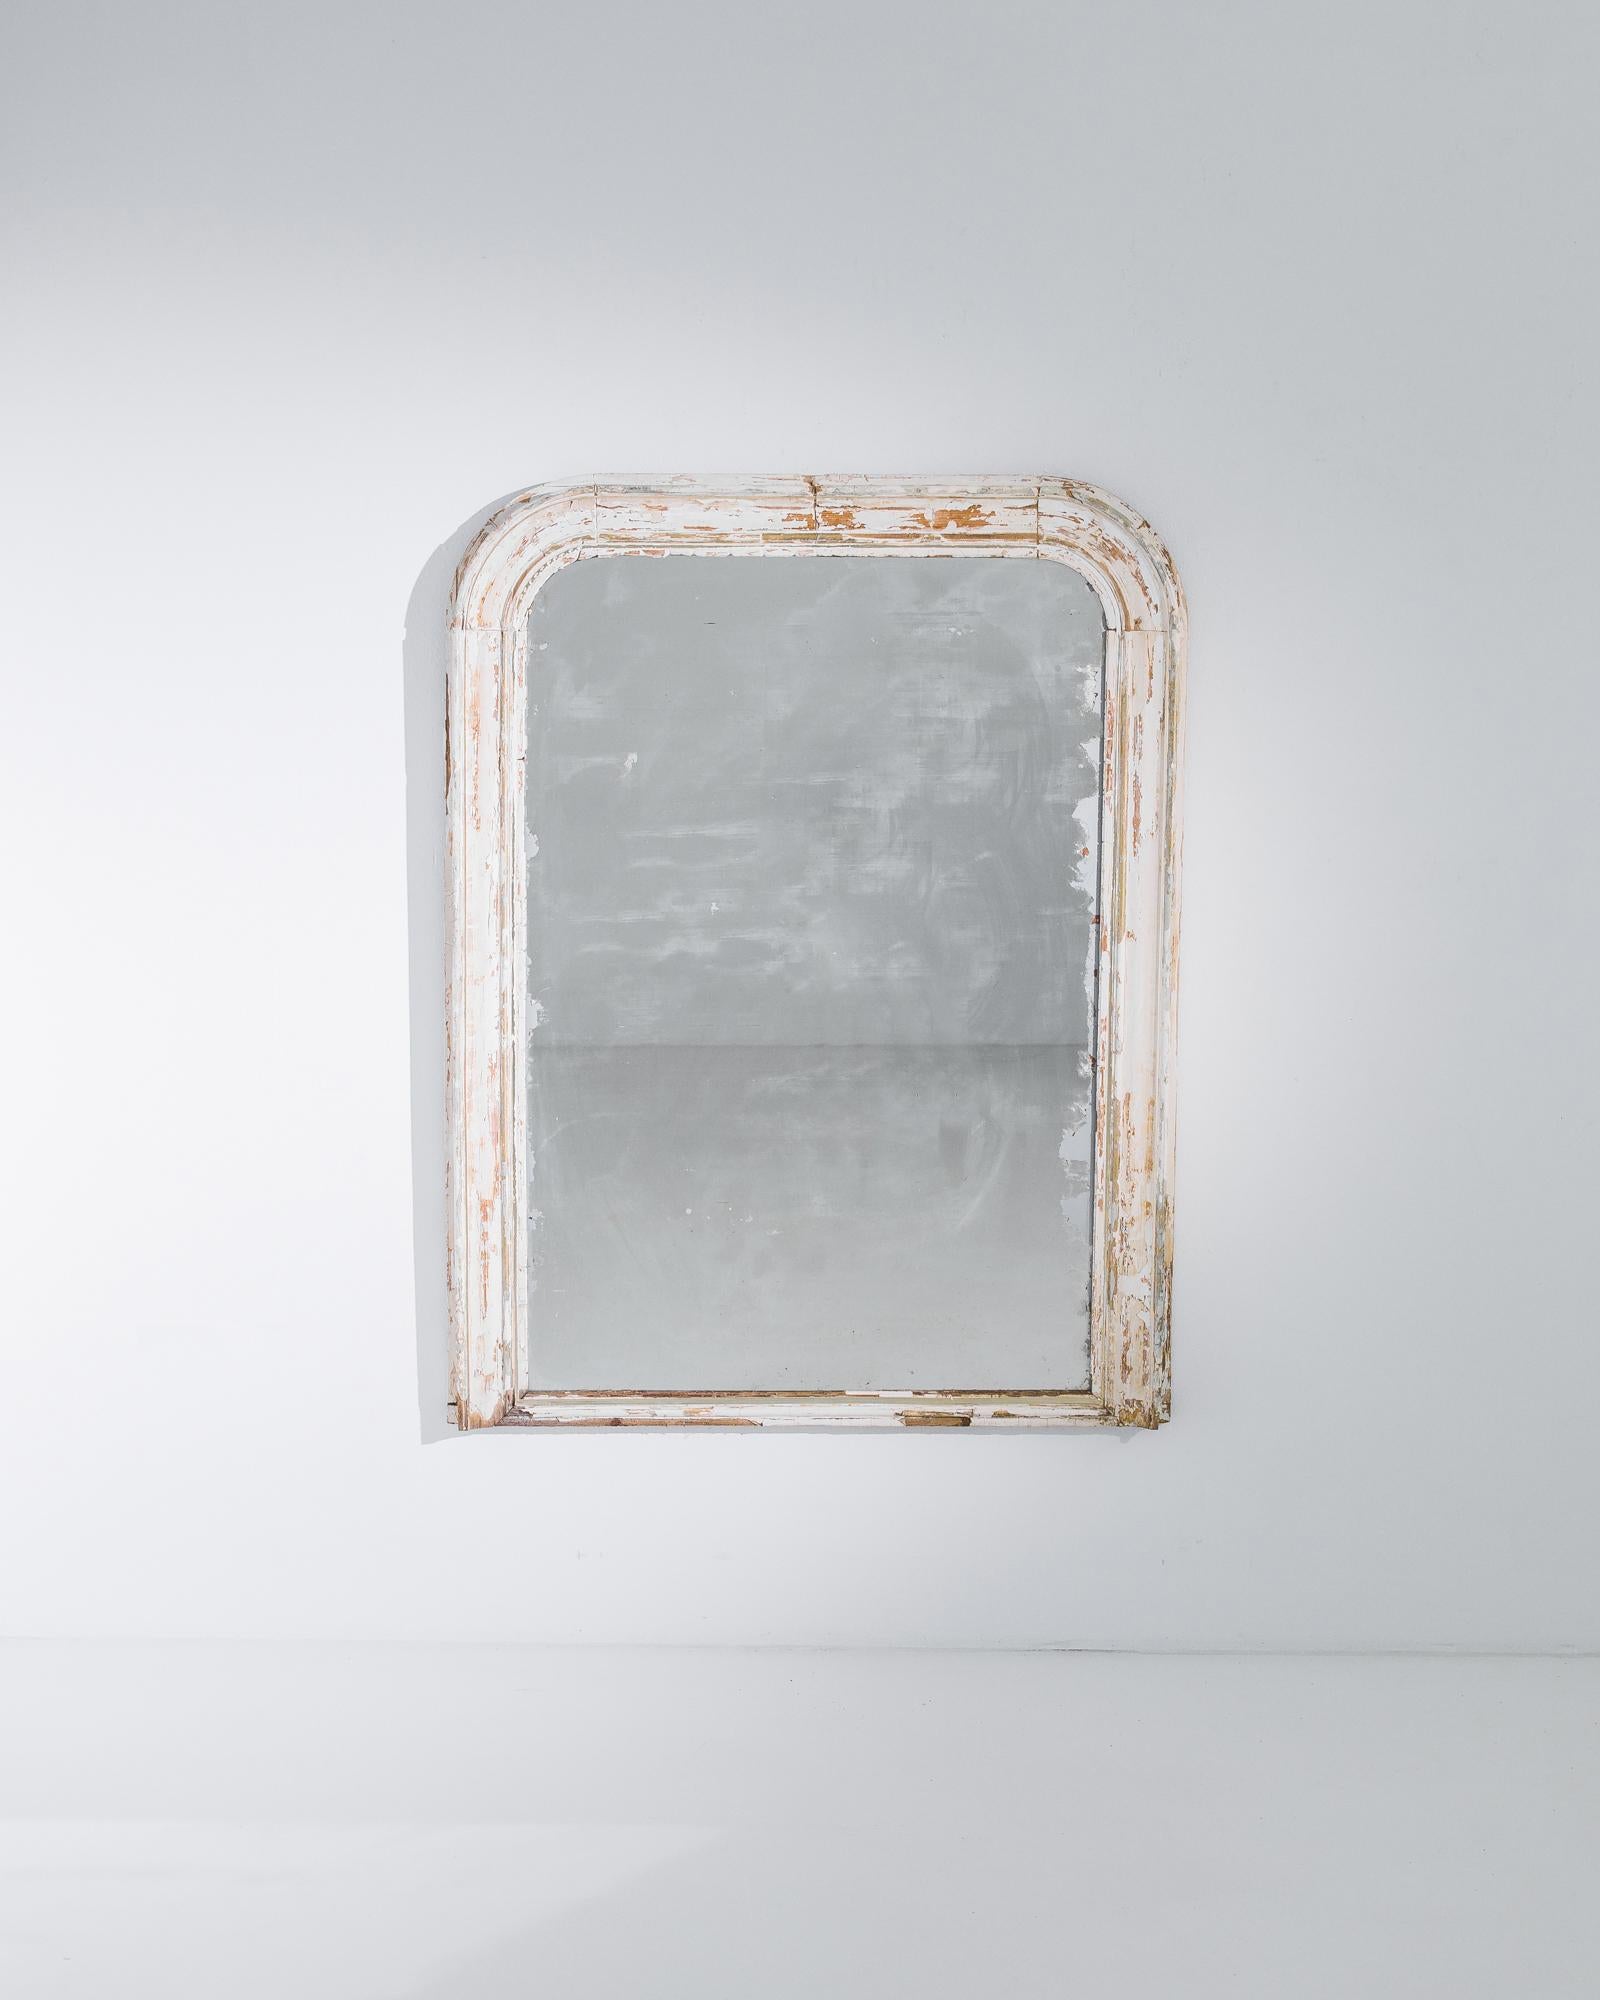 A white patinated wood framed mirror from France, produced circa 1880. A simple arch of glass, is a distinct feature of the Louis Phillipe style, set in a deep frame of milky white wood. Chips in the original patination, and a sliver of silver